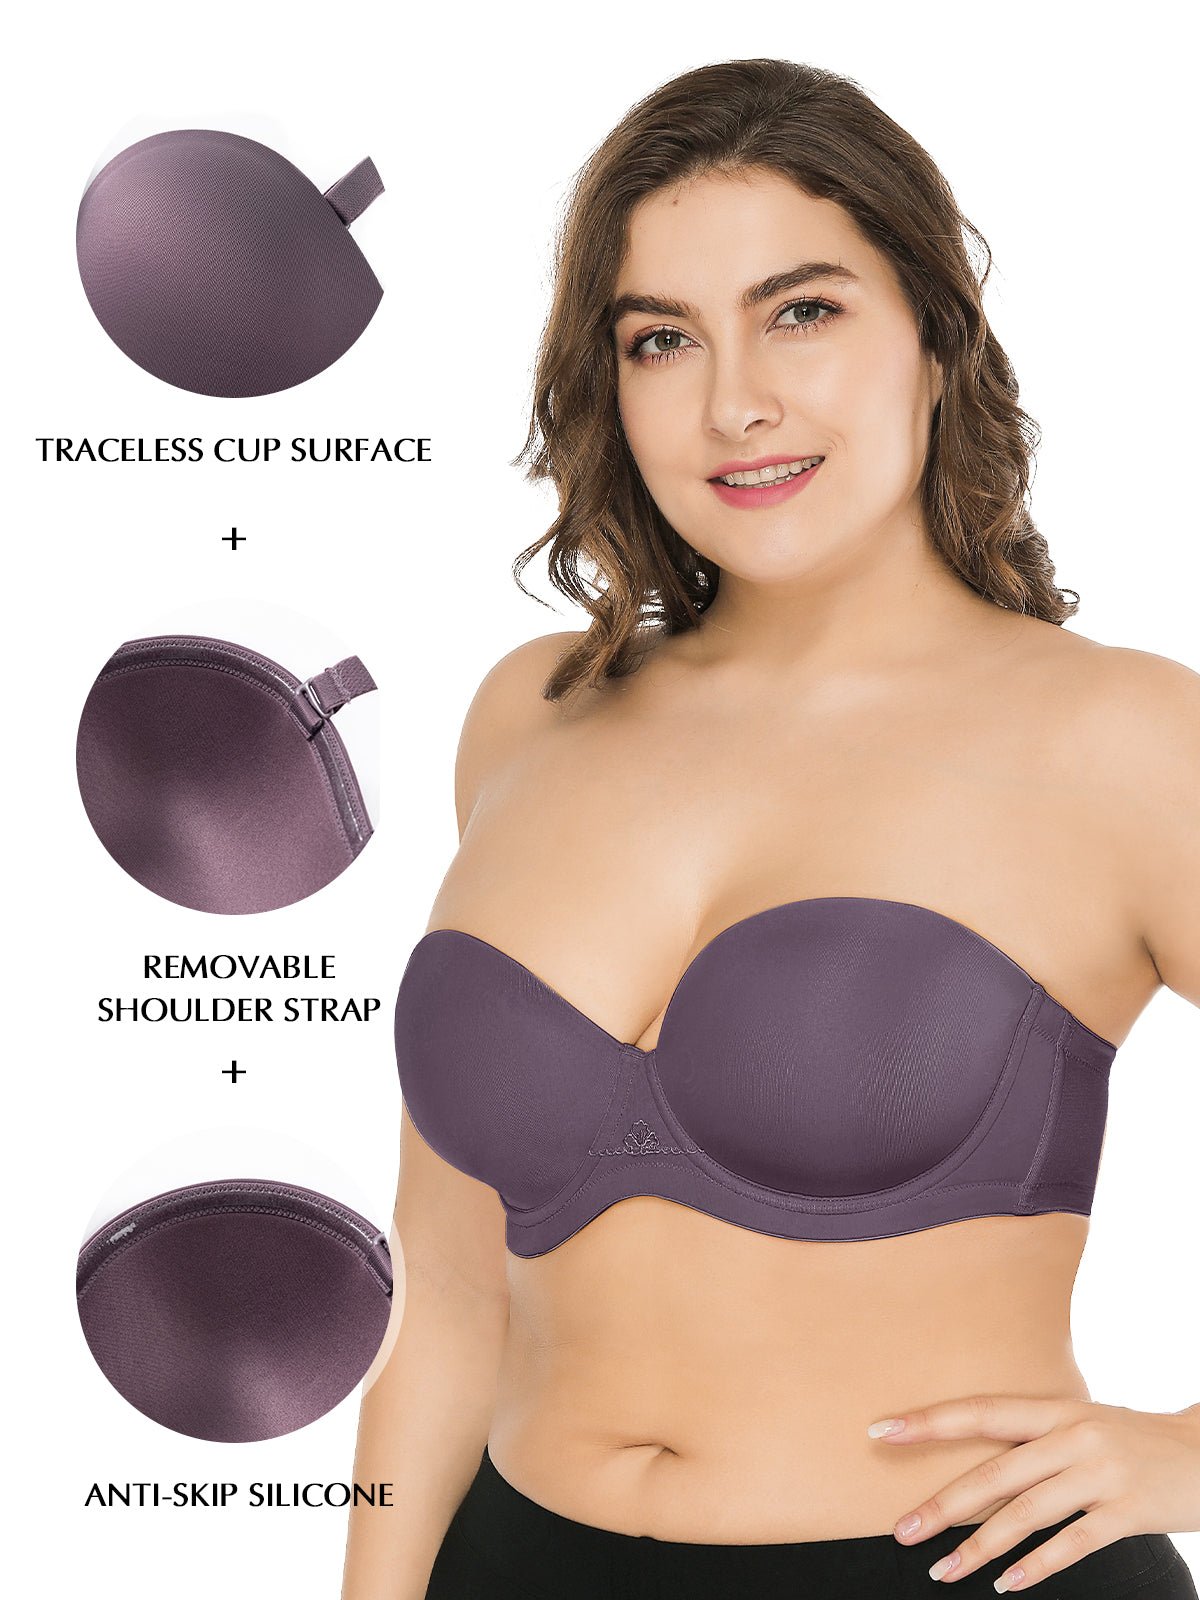 H&m new 2-pack strapless bras Sizes 34D & 38C With silicone edge